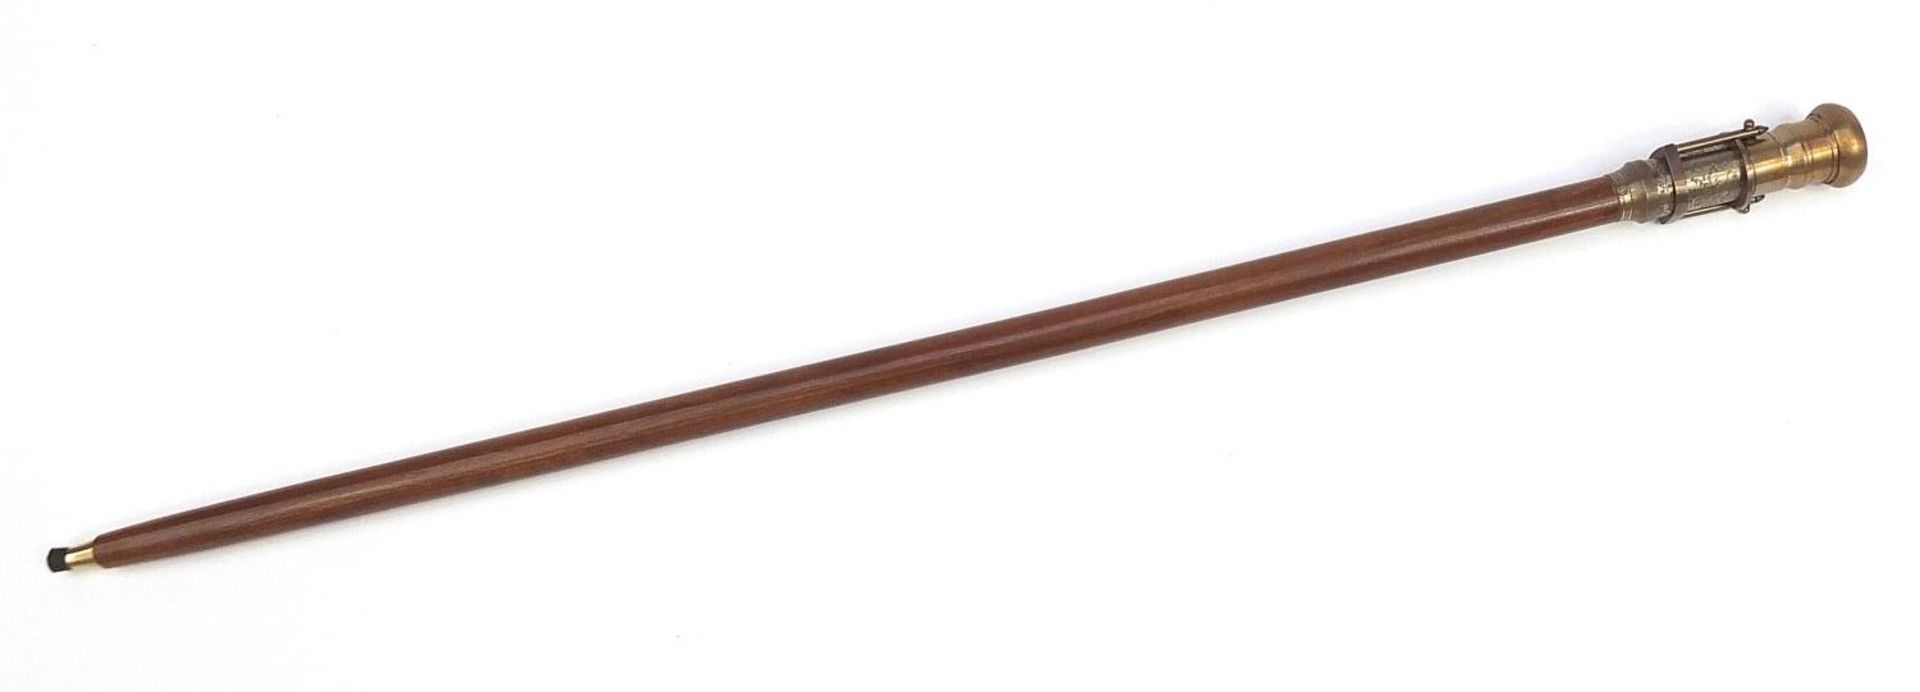 Hardwood walking stick with brass two draw telescope and compass handle, 100cm in length - Image 2 of 5